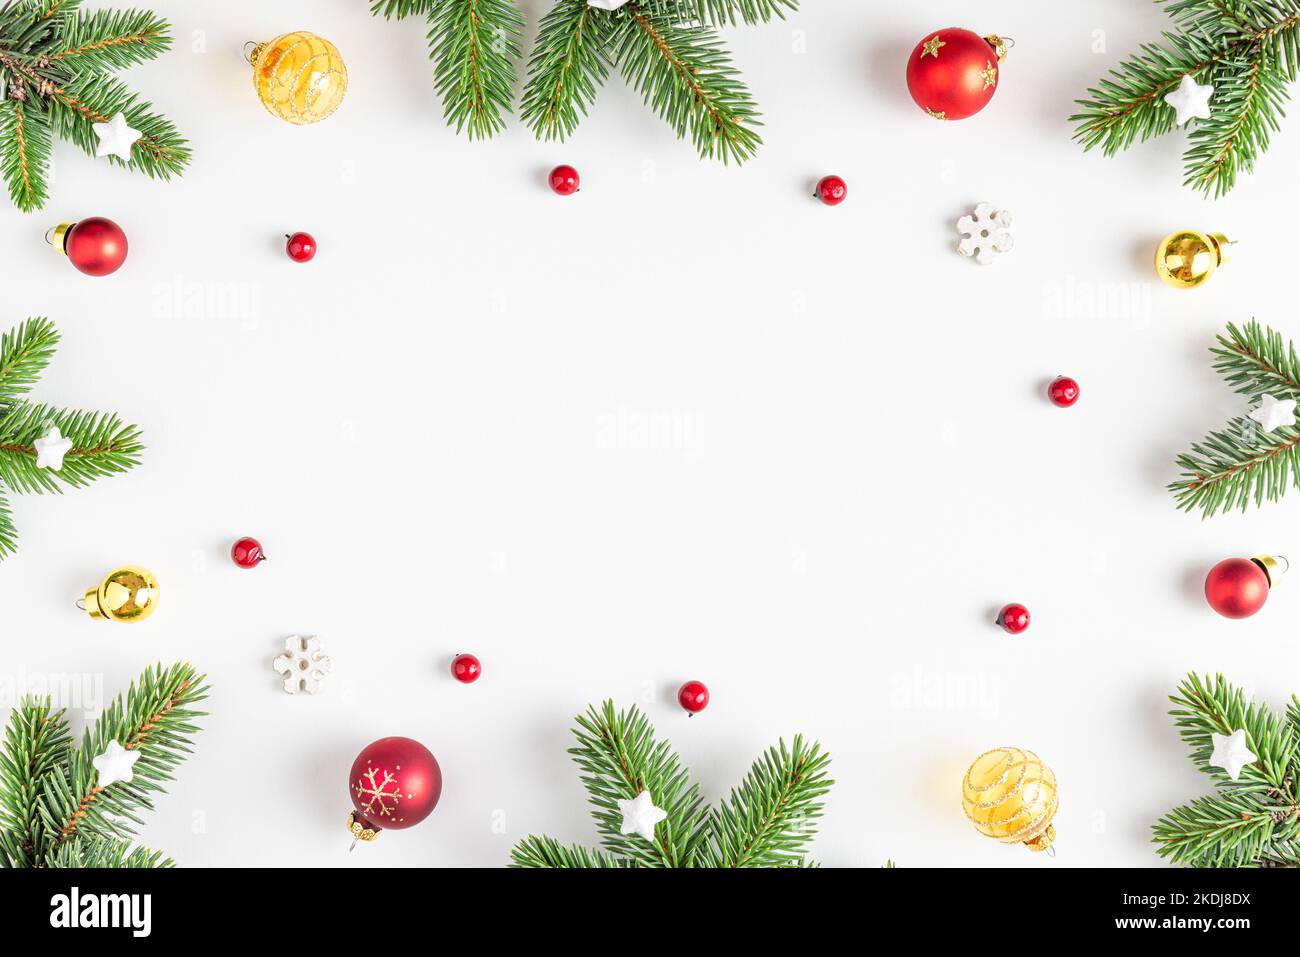 Christmas composition. Frame made of fir tree, festive decorations, red berries on white background. Flat lay. Top view with copy space. Winter holida Stock Photo